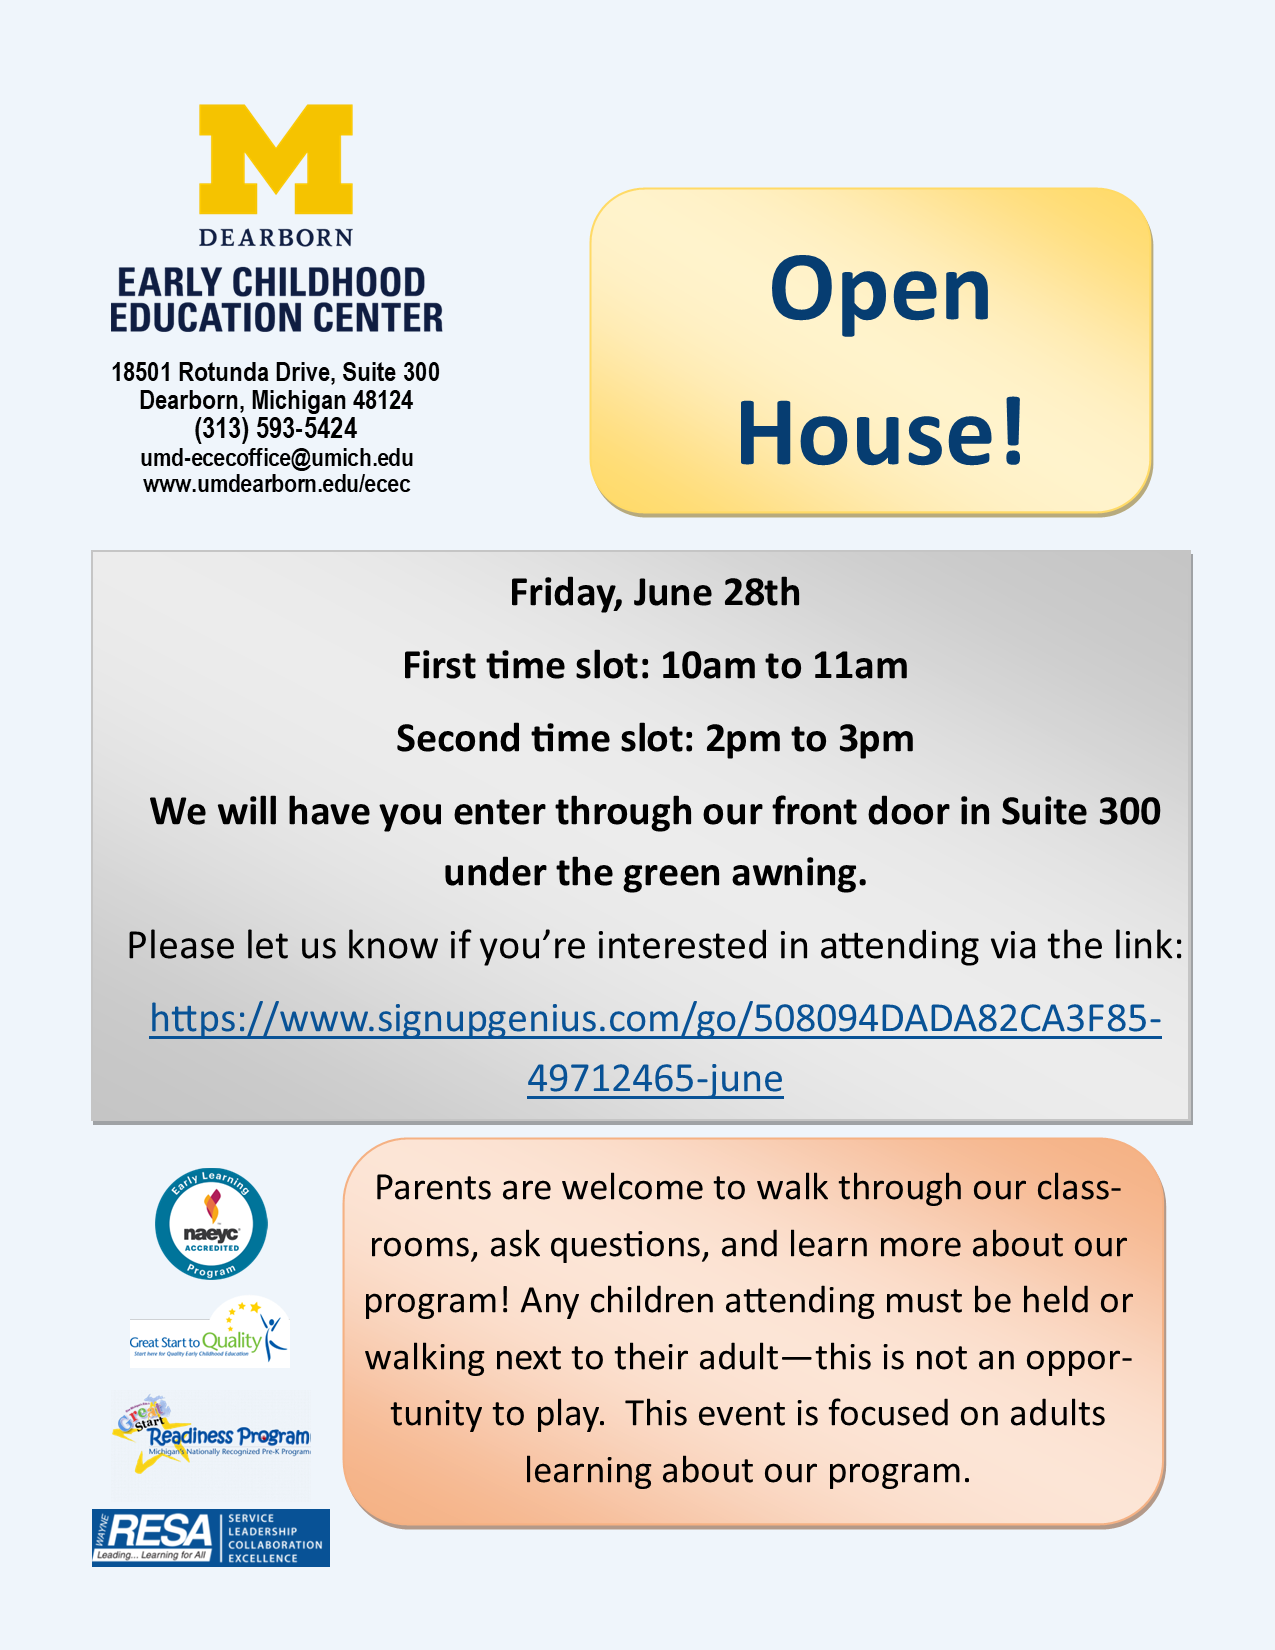 Open House, Friday, June 28, 2024. First time slot 10 to 11am. Second time slot 2 to 3 pm.